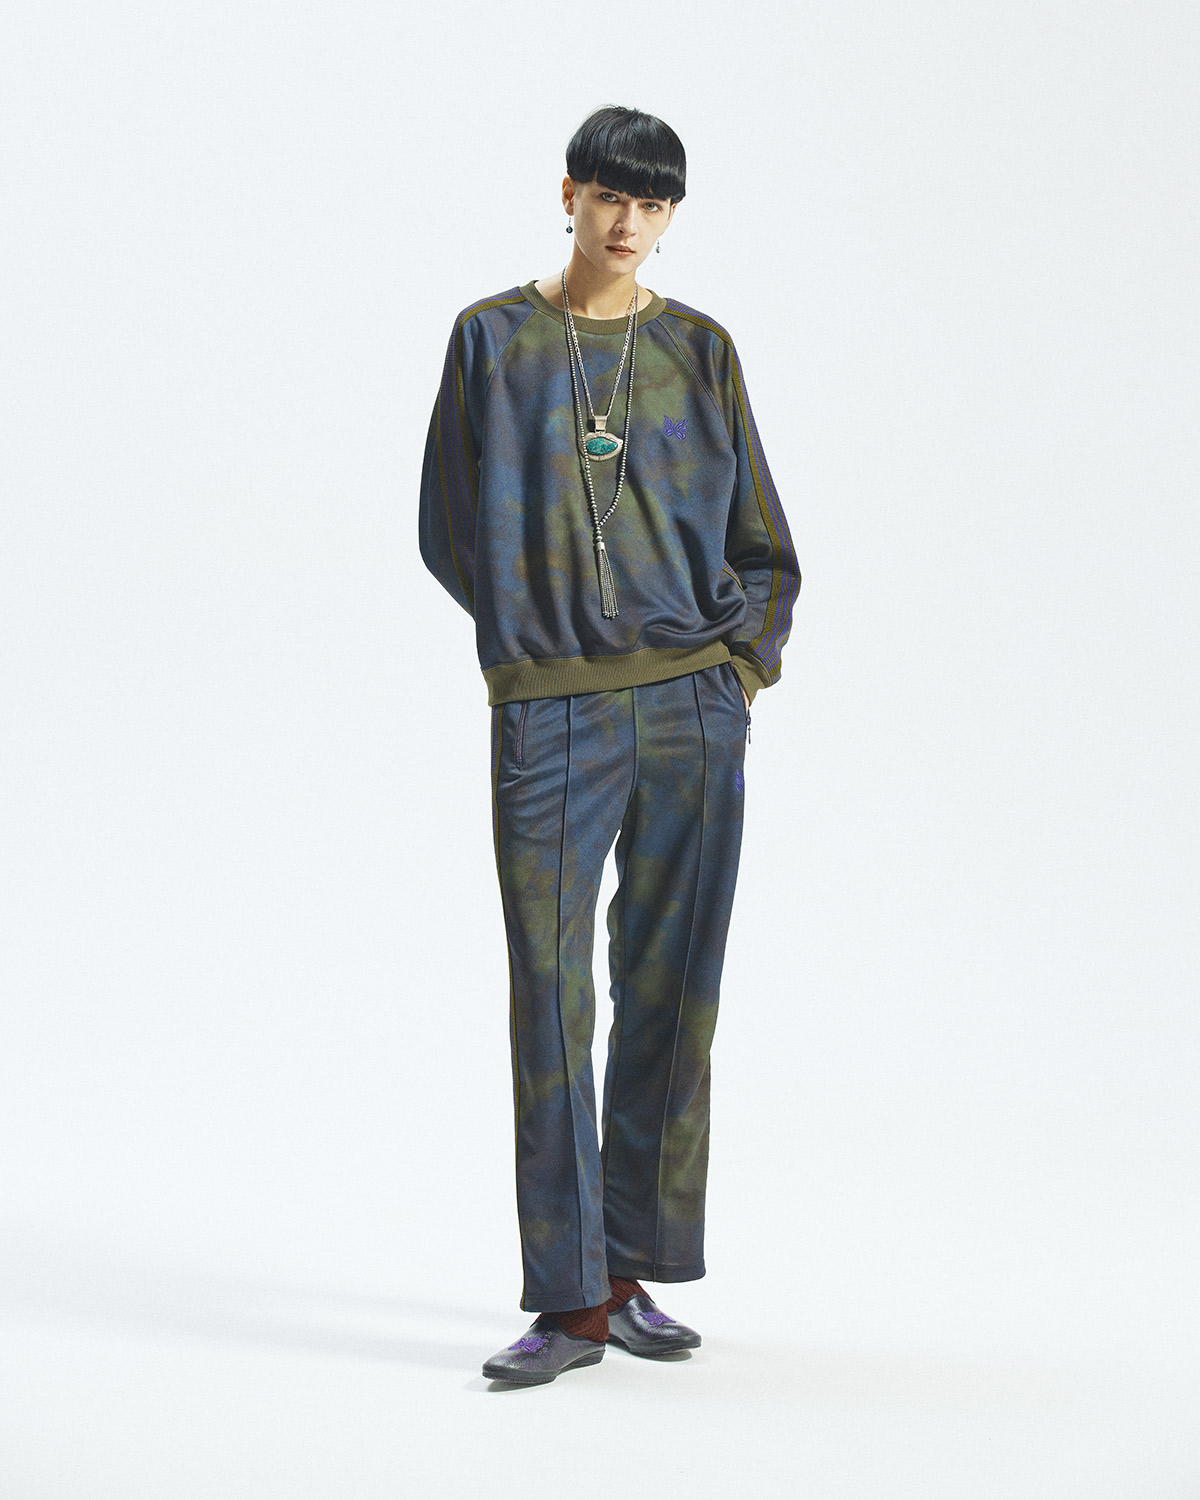 〈NEEDLES〉TRACK SUITS
PRINTED UNEVEN DYE for NEPENTHES